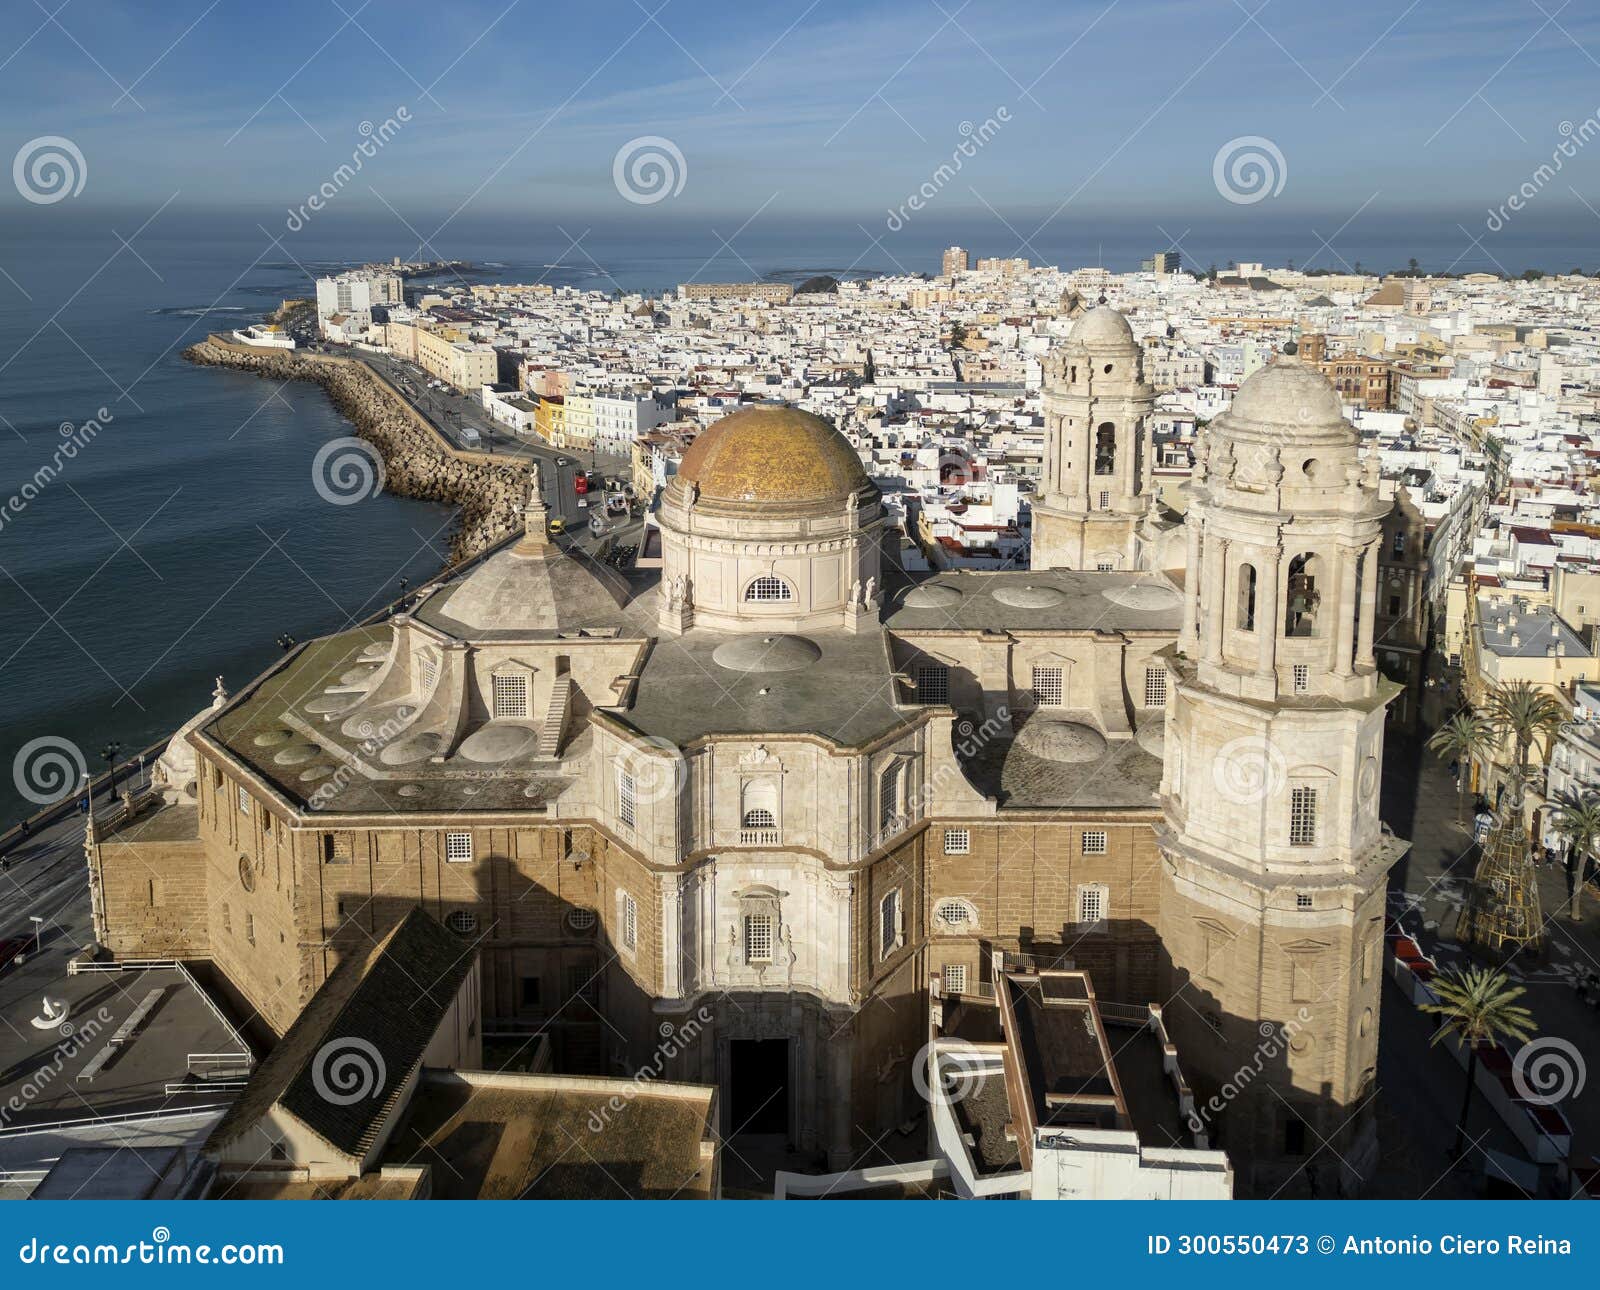 aerial view of the cathedral of the holy cross of cadiz, spain